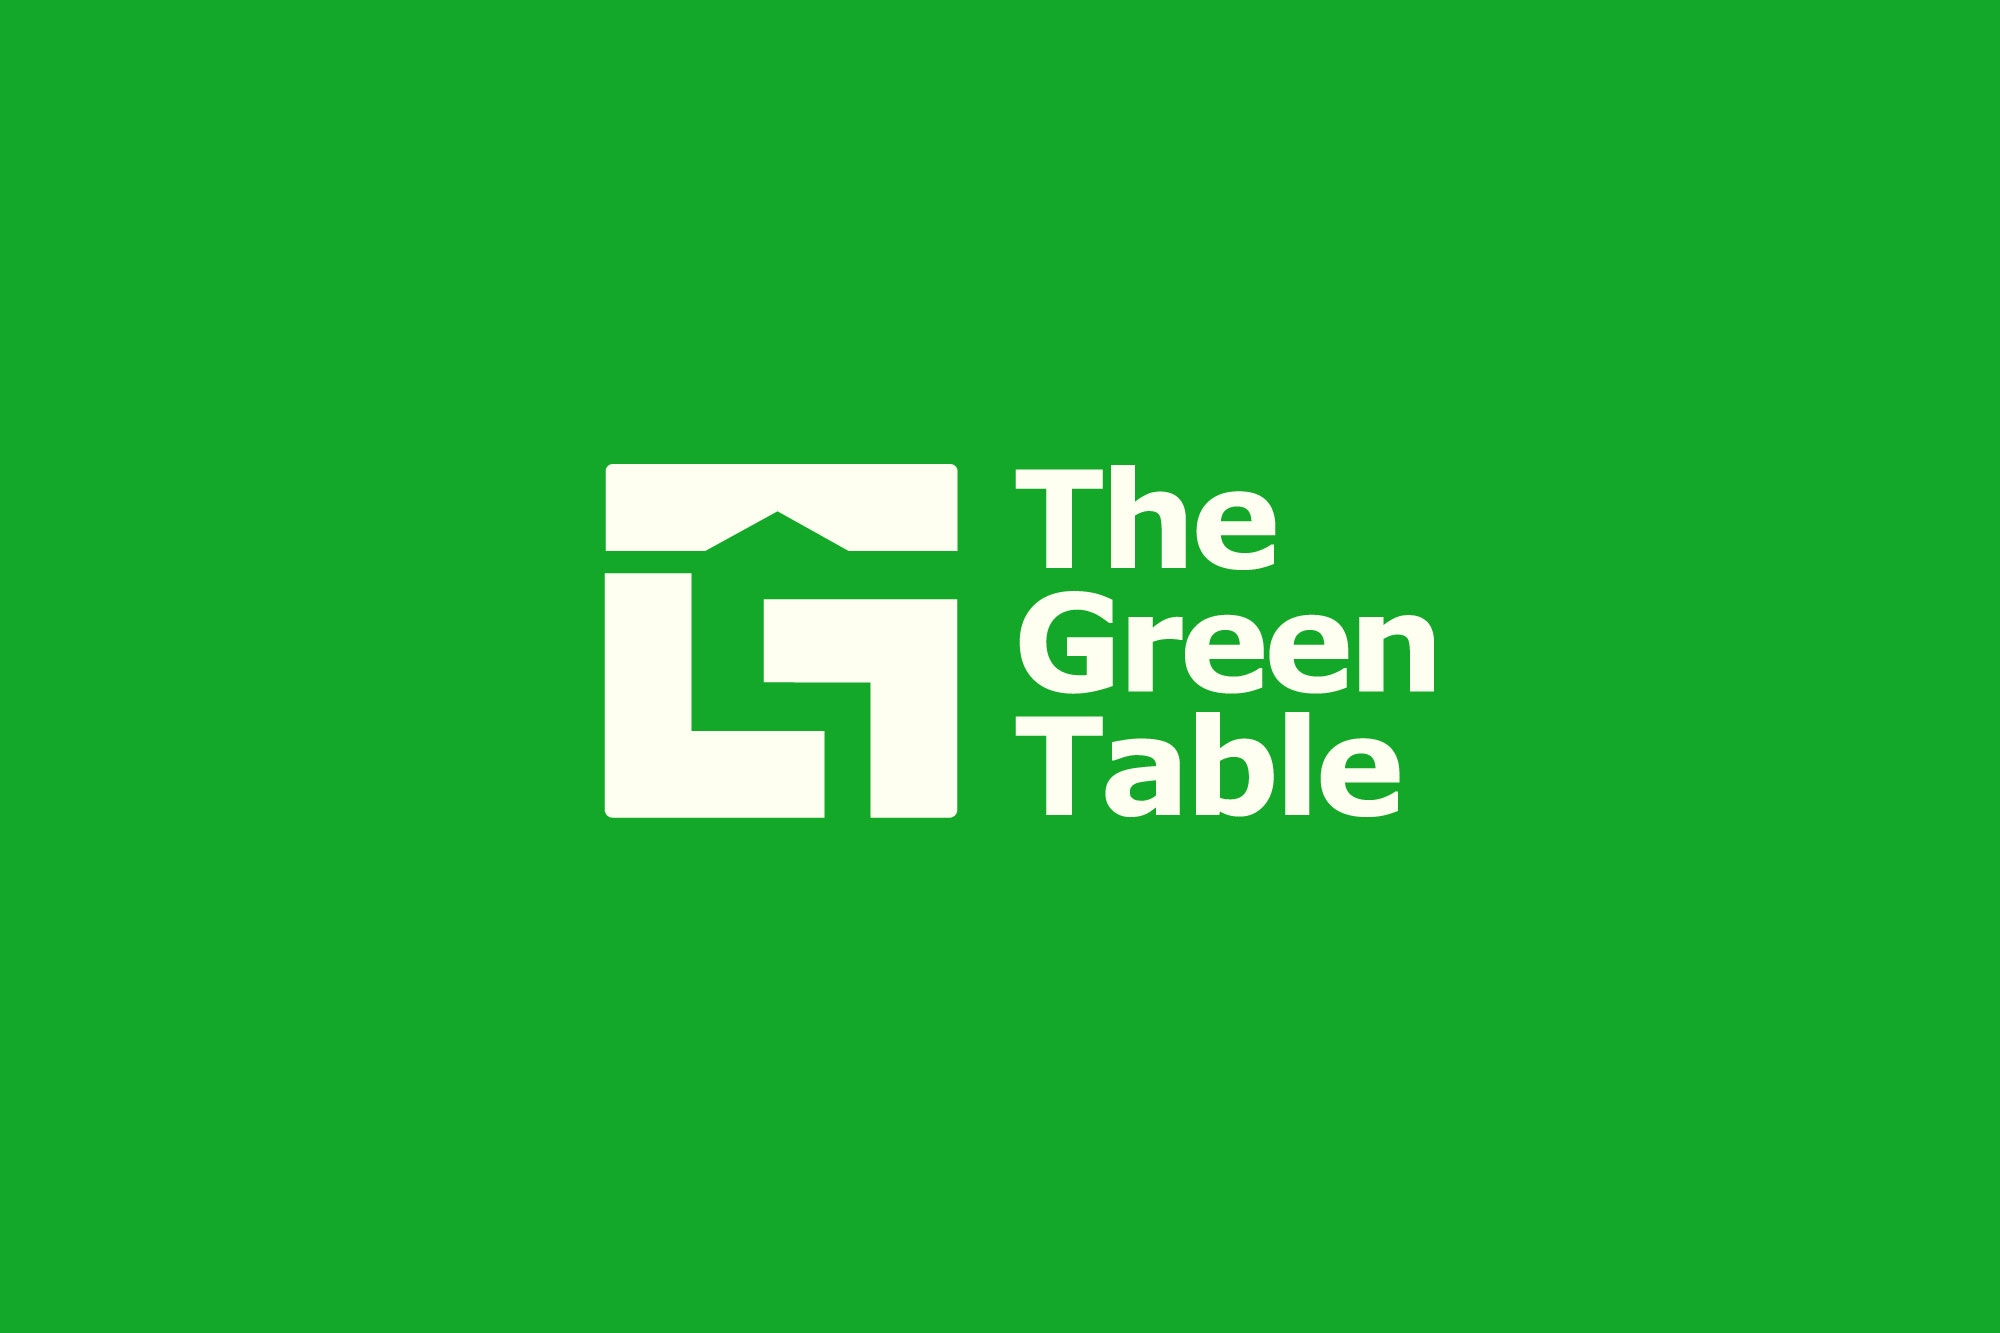 The Green Table Ph - Tribox Design